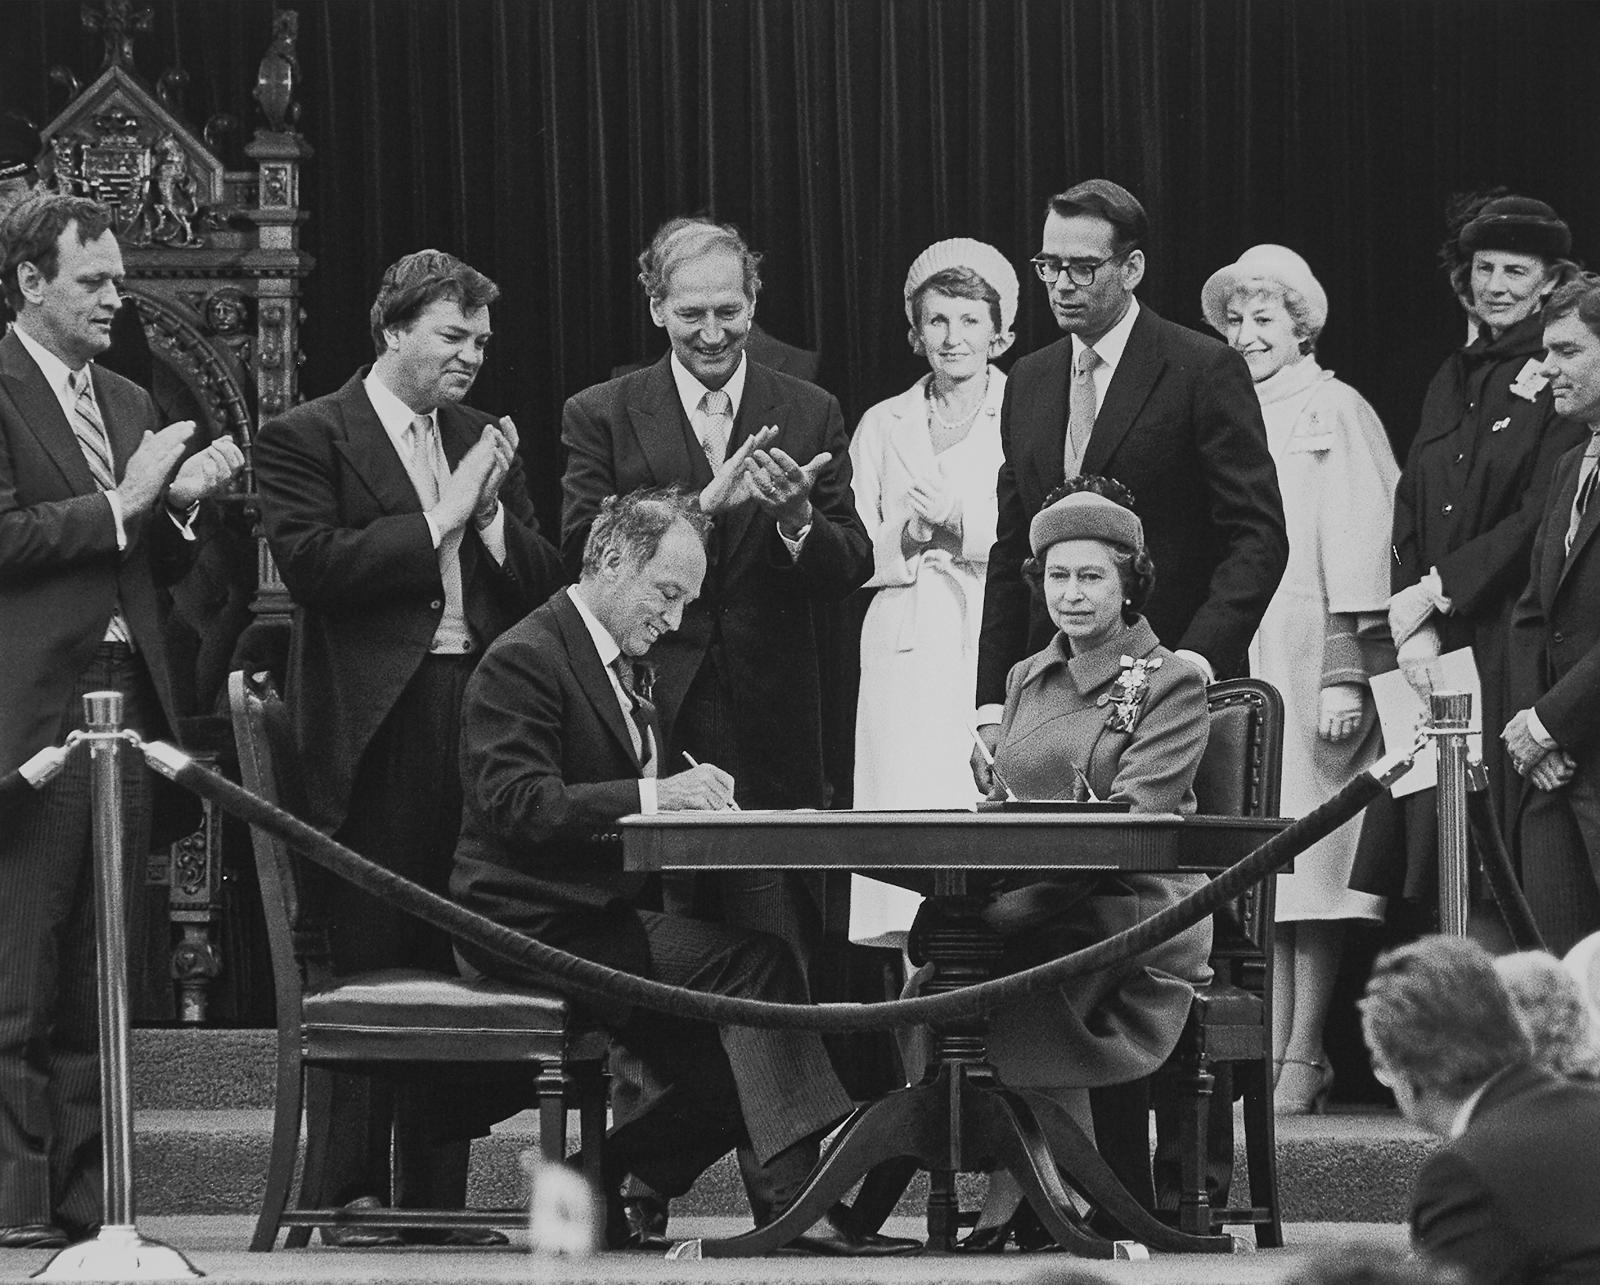 Ron Poling for The - Queen Elizabeth Ii With Pierre Elliot Trudeau Signing The Canadian Constitutional Proclamation, Ottawa, April 17, 1982